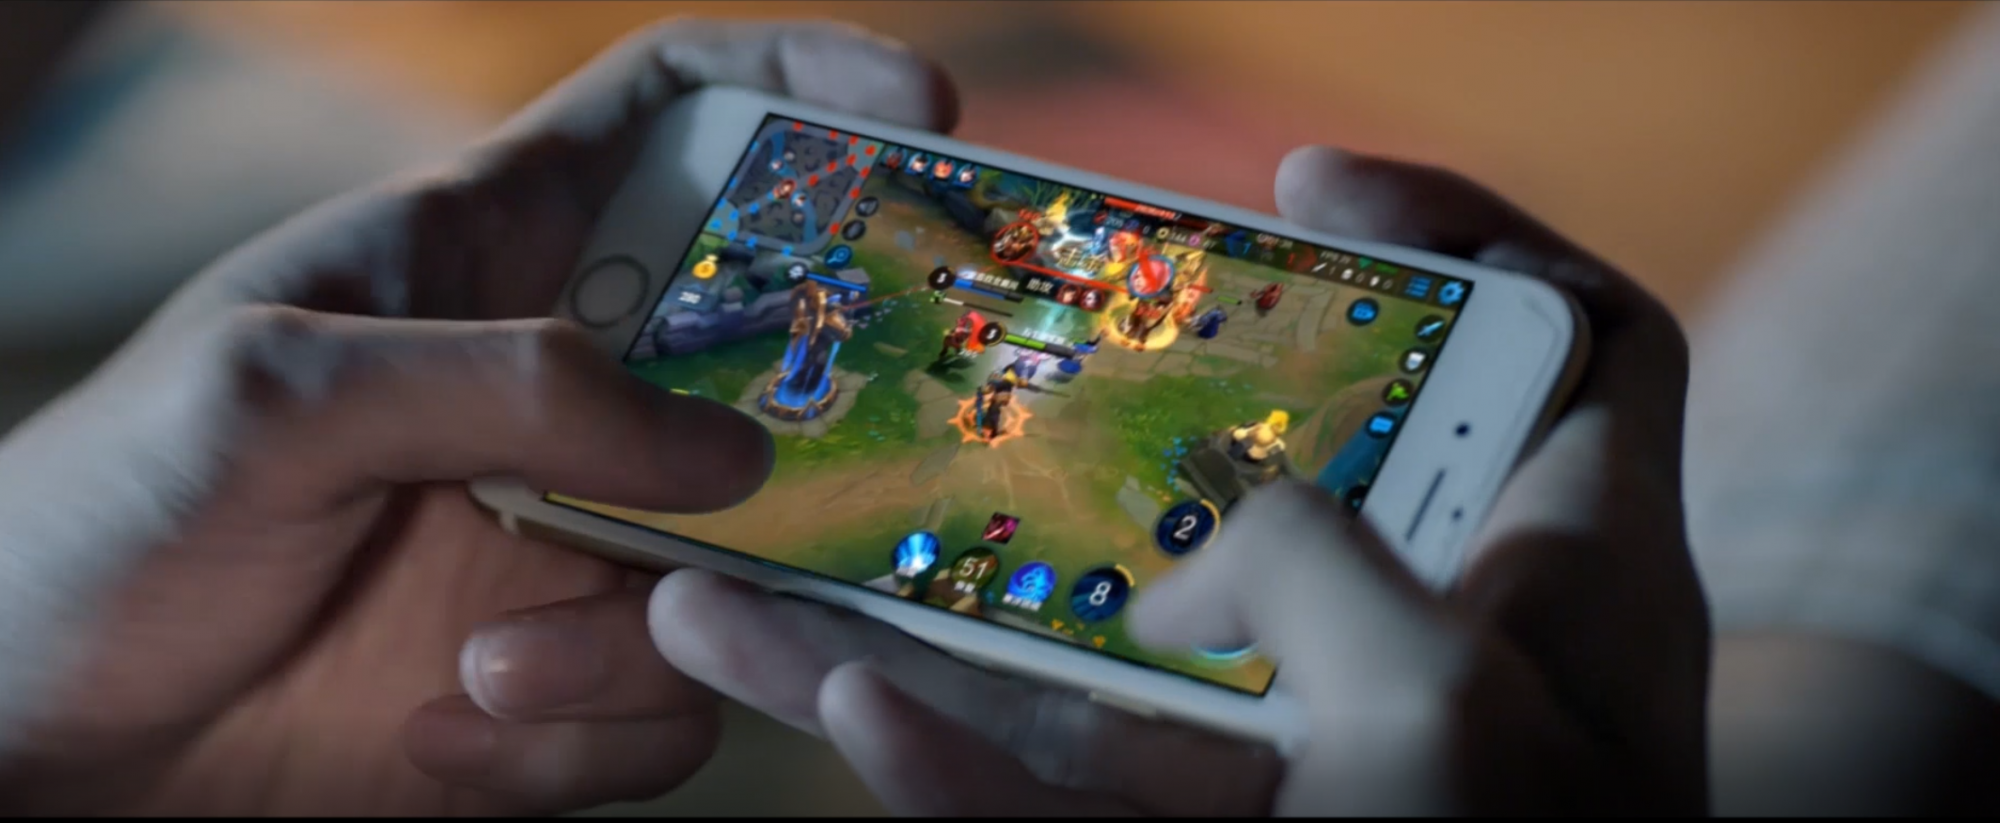 Experience the excitement of the Kings League on your mobile device with  its official video game